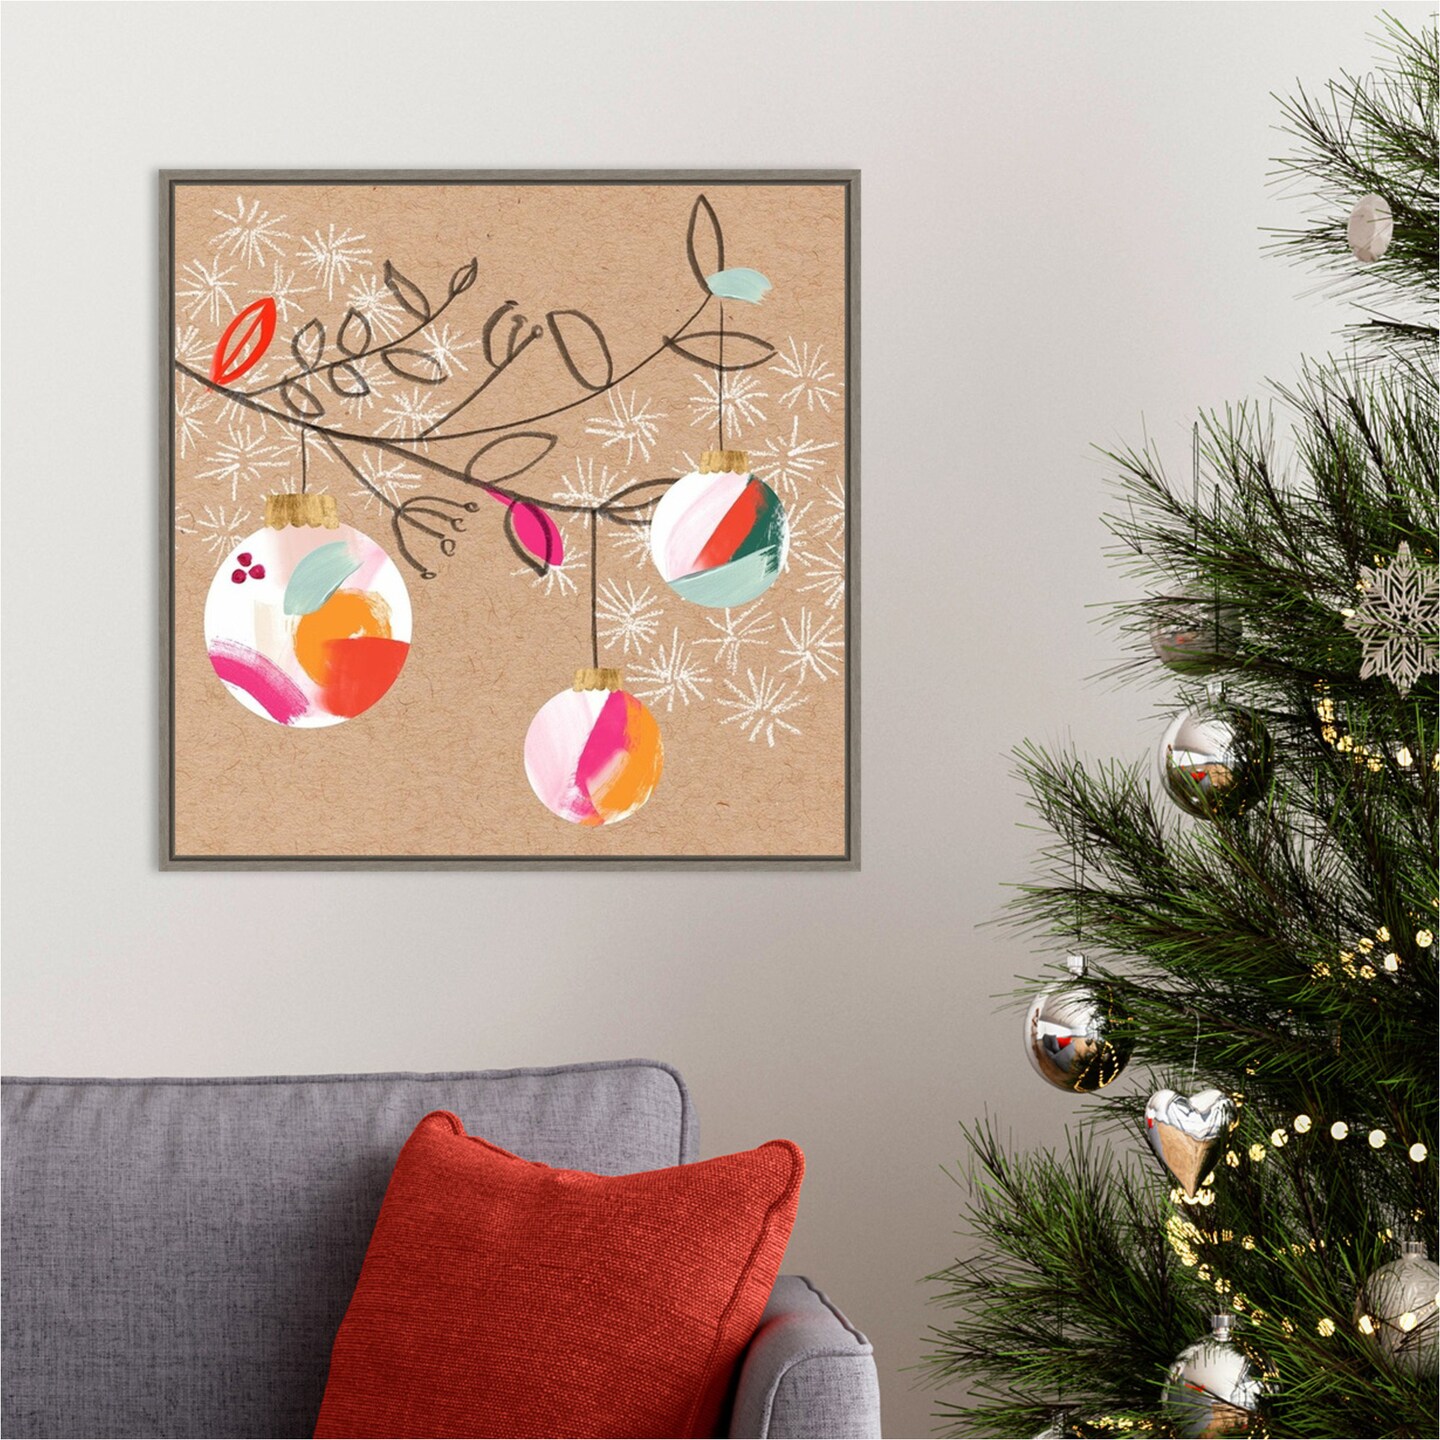 Crafty Christmas III by Jennifer Paxton Parker 22-in. W x 22-in. H. Canvas Wall Art Print Framed in Grey